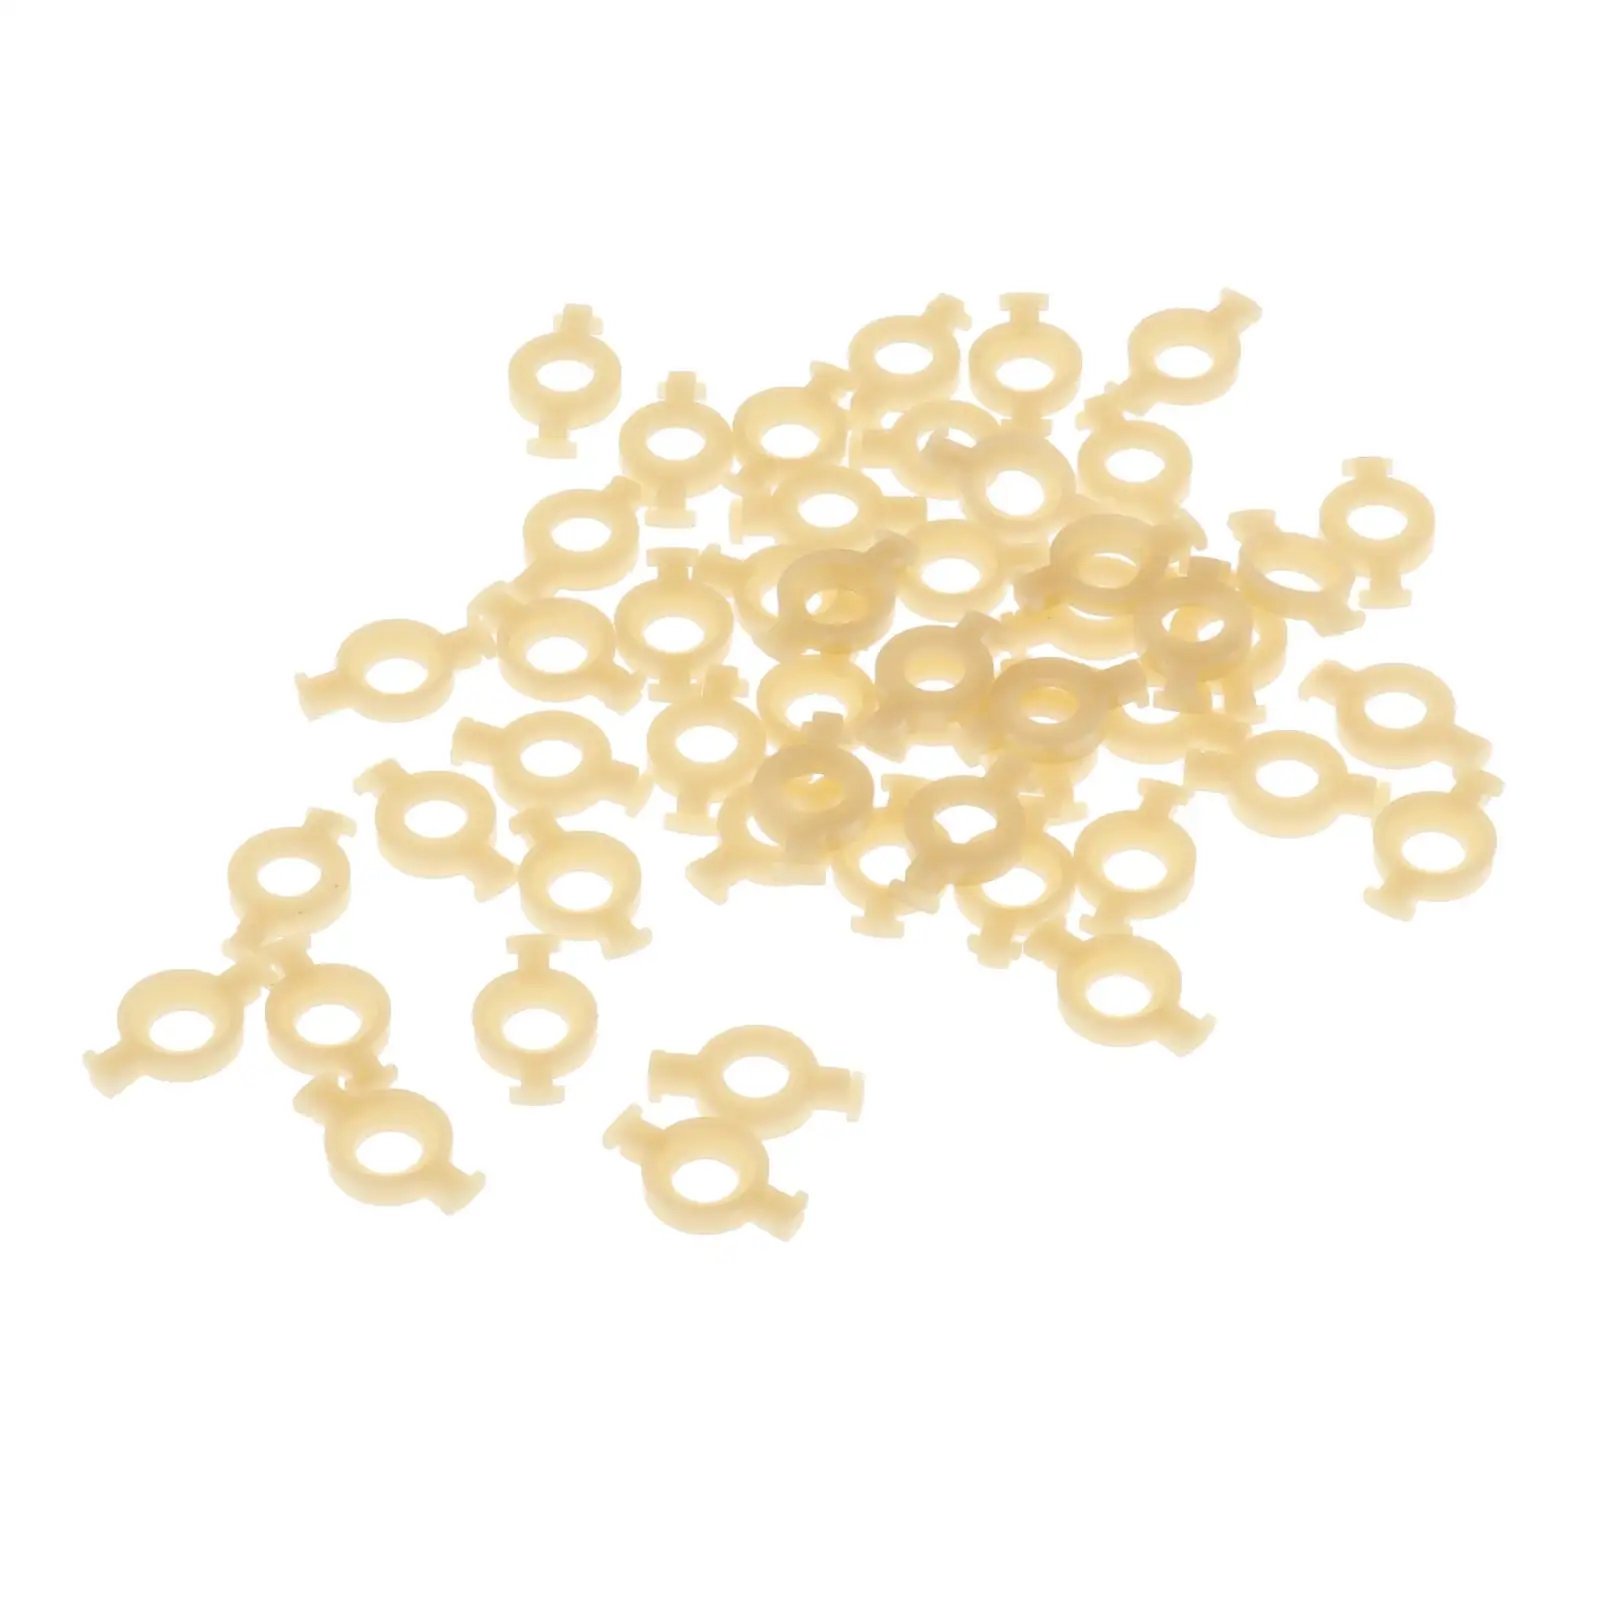 50x Plastic Trumpet Valve Guides Holder for Replacement Parts Accessories